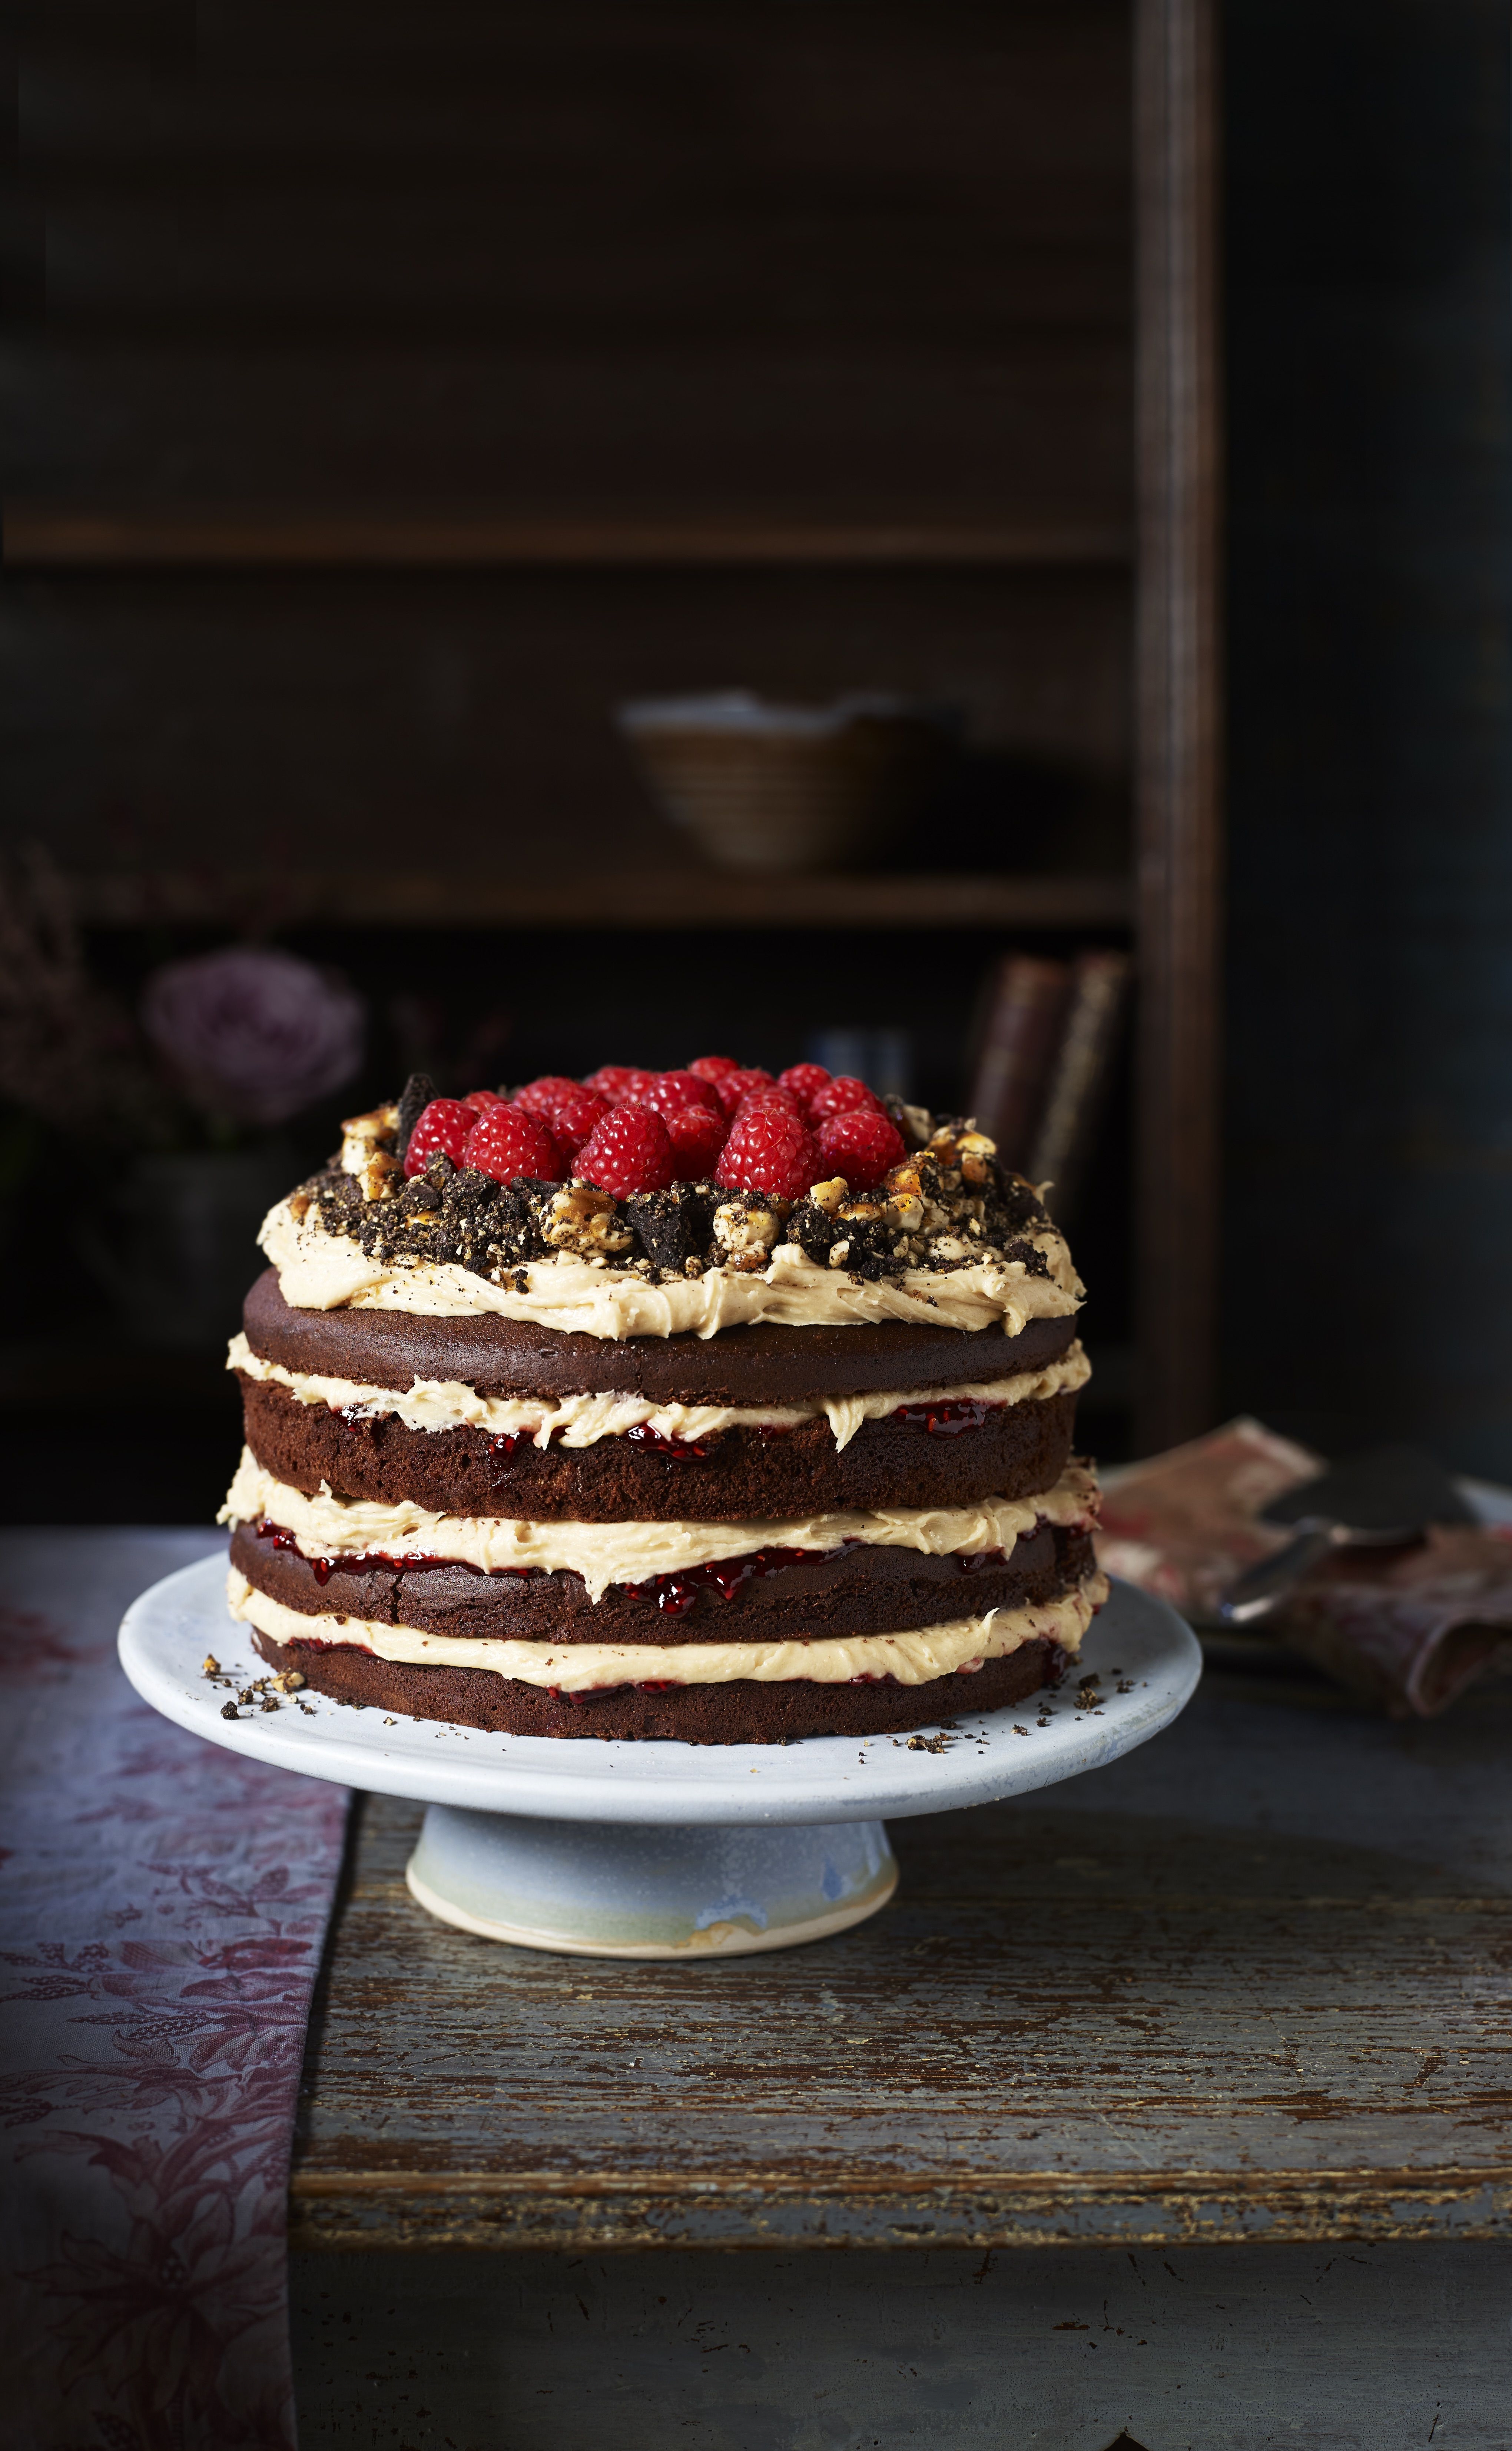 Peanut Butter and Jelly Cake | The Cake Blog